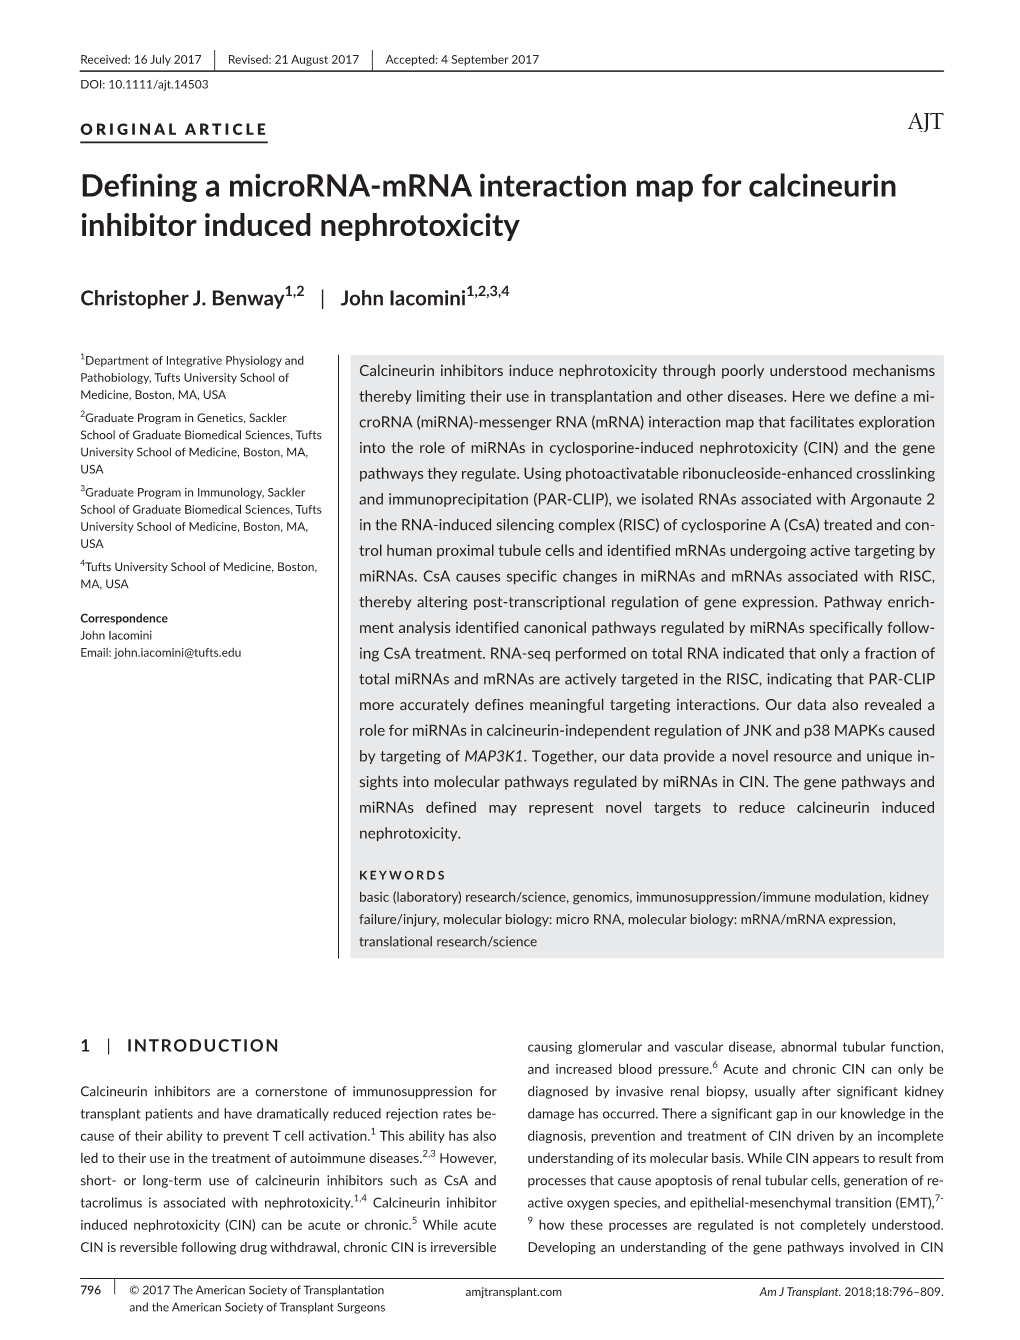 Defining a Microrna‐Mrna Interaction Map for Calcineurin